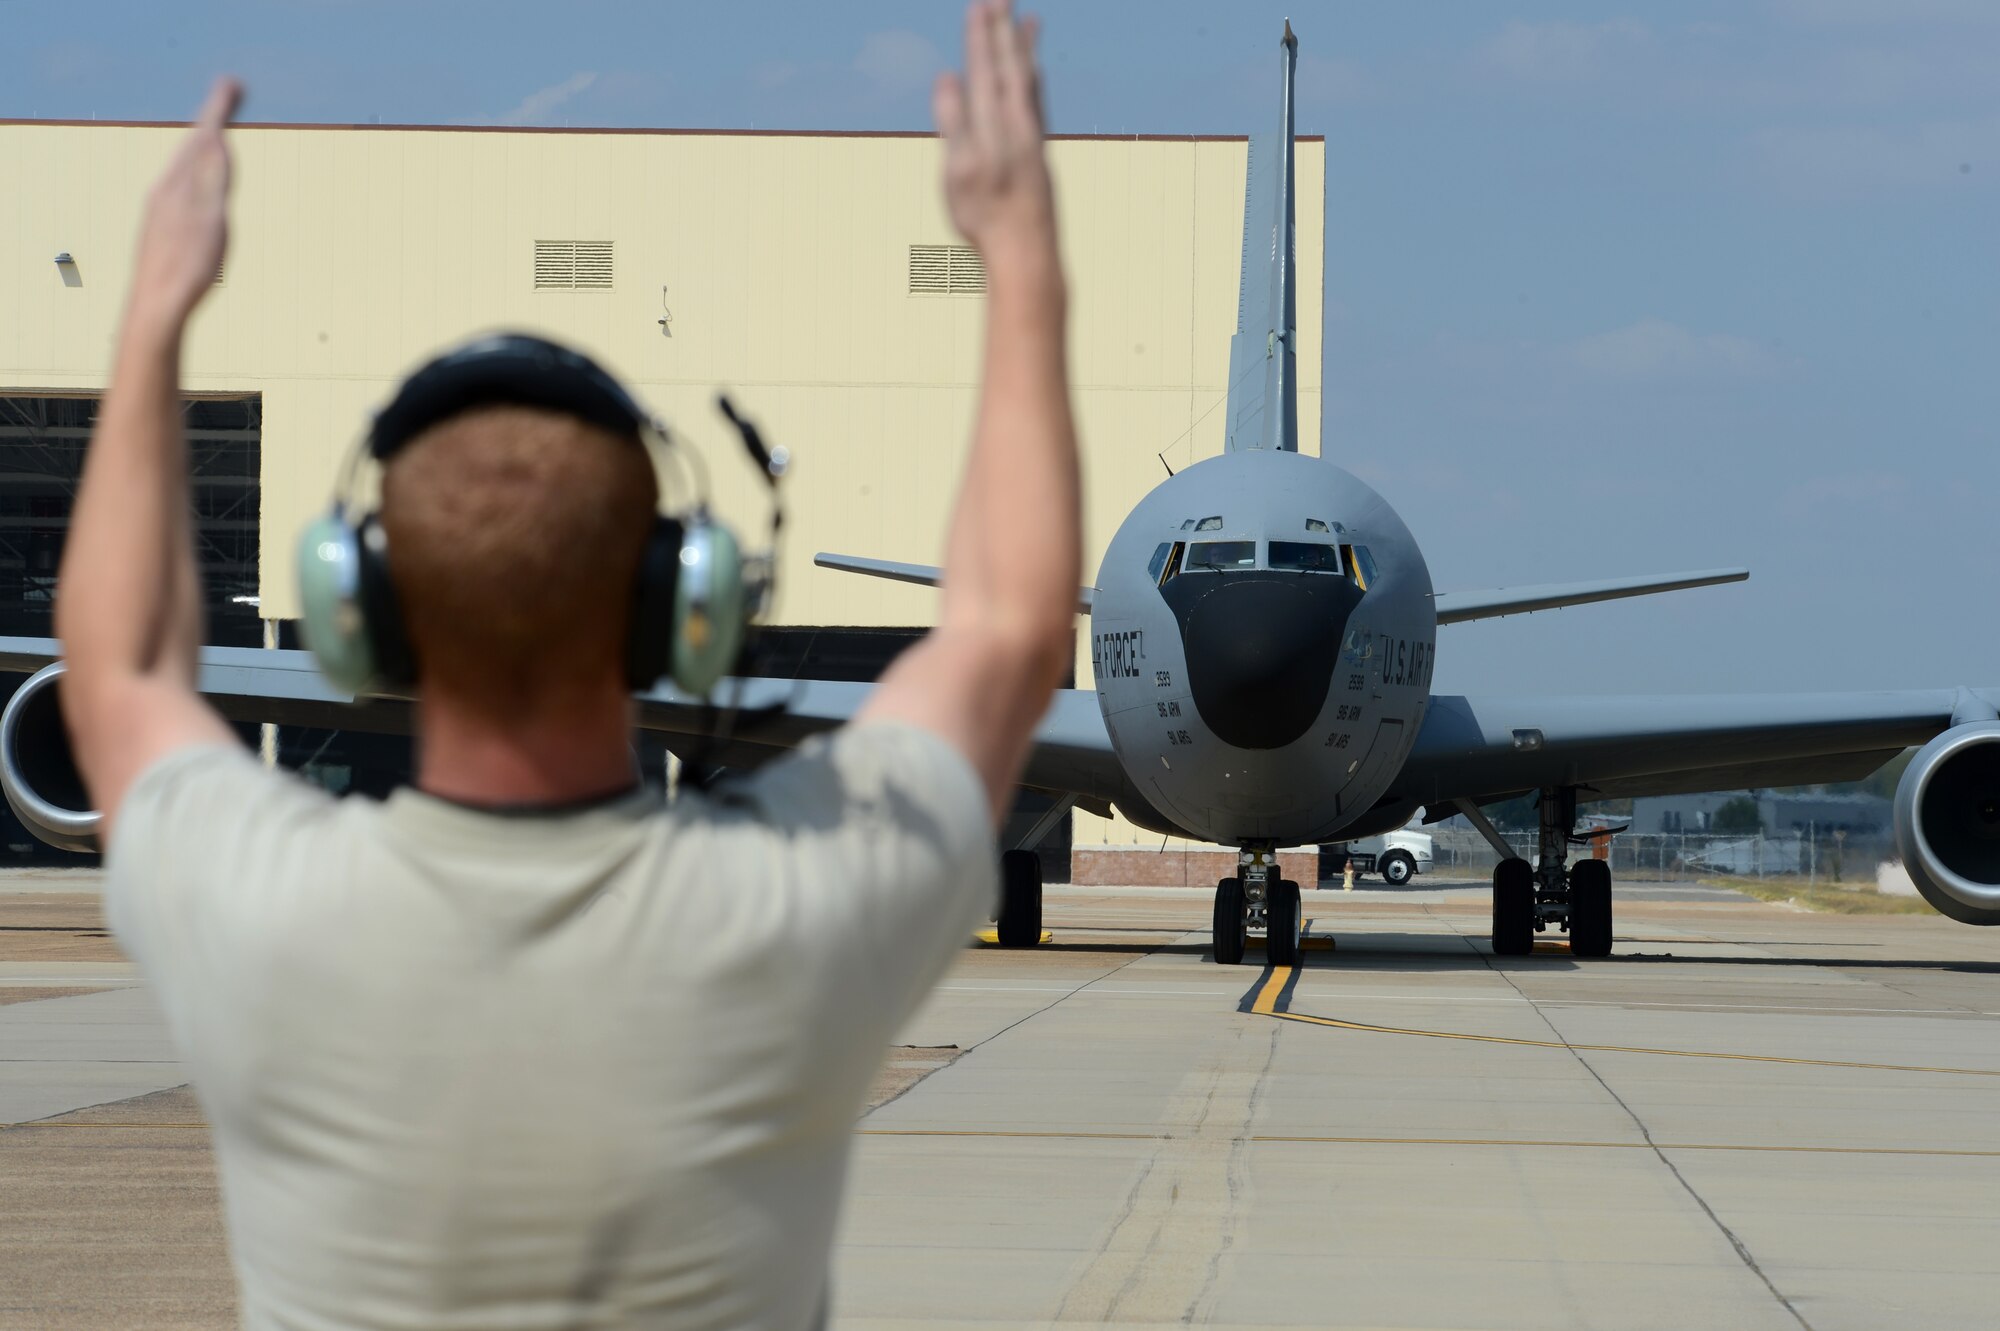 A crew chief from Seymour Johnson Air Force Base, North Carolina, gives a departure signal to the pilots of a KC-135 Stratotanker assigned to the 916th Air Refueling Wing at Barksdale Air Force Base, La., Oct. 6, 2015. More than 60 aircraft were evacuated here to avoid damage from Hurricane Joaquin. (U.S. Air Force photo/Senior Airman Joseph A. Pagán Jr.)